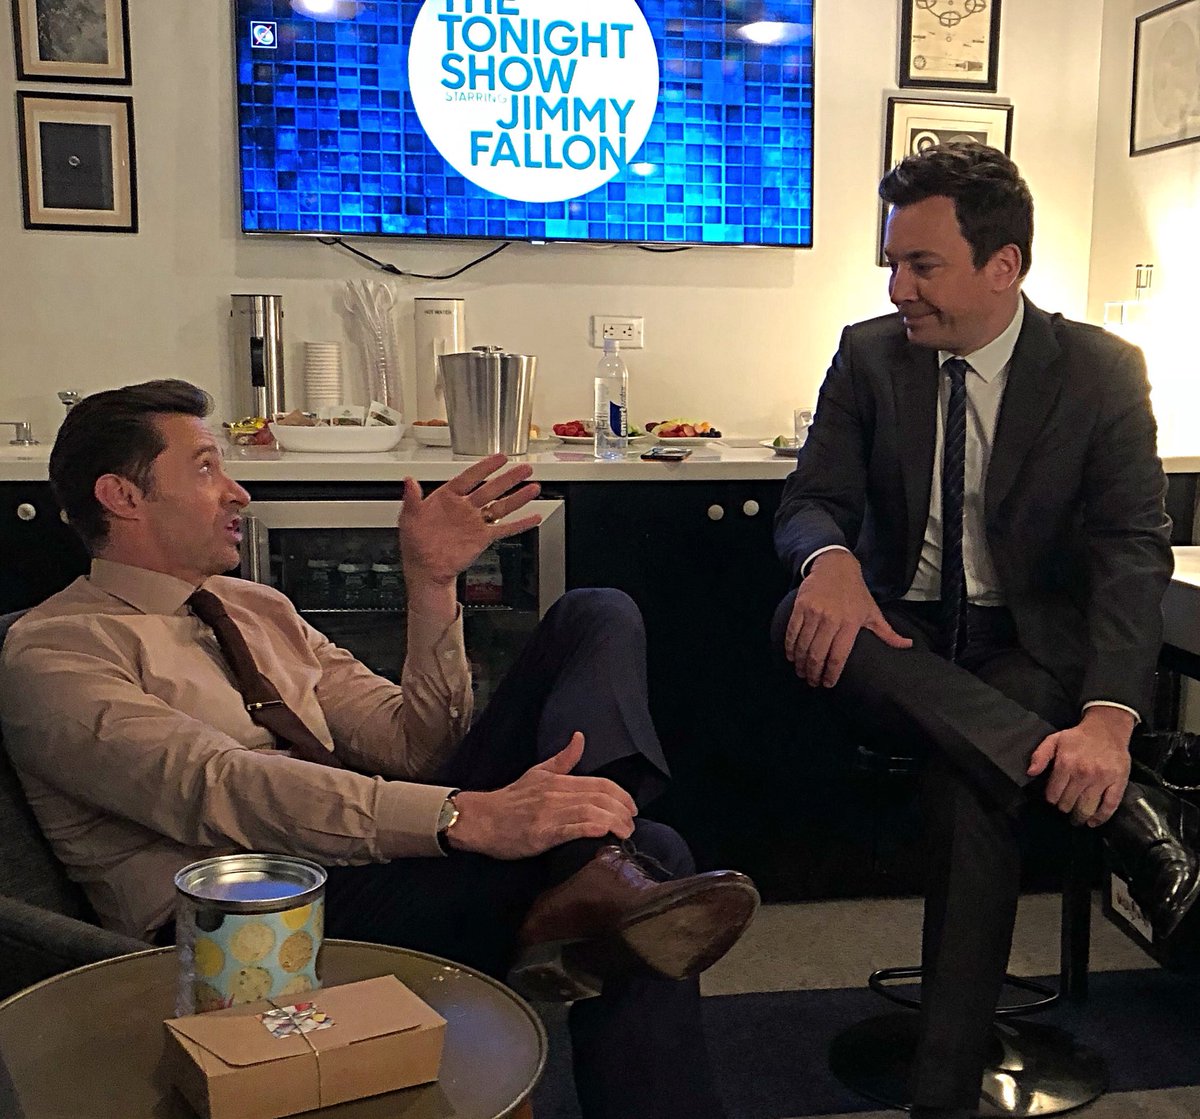 Giving @jimmyfallon some monologue notes for tonight’s show. @GreatestShowman #9TimeChampion https://t.co/ZuEQK4yM6M